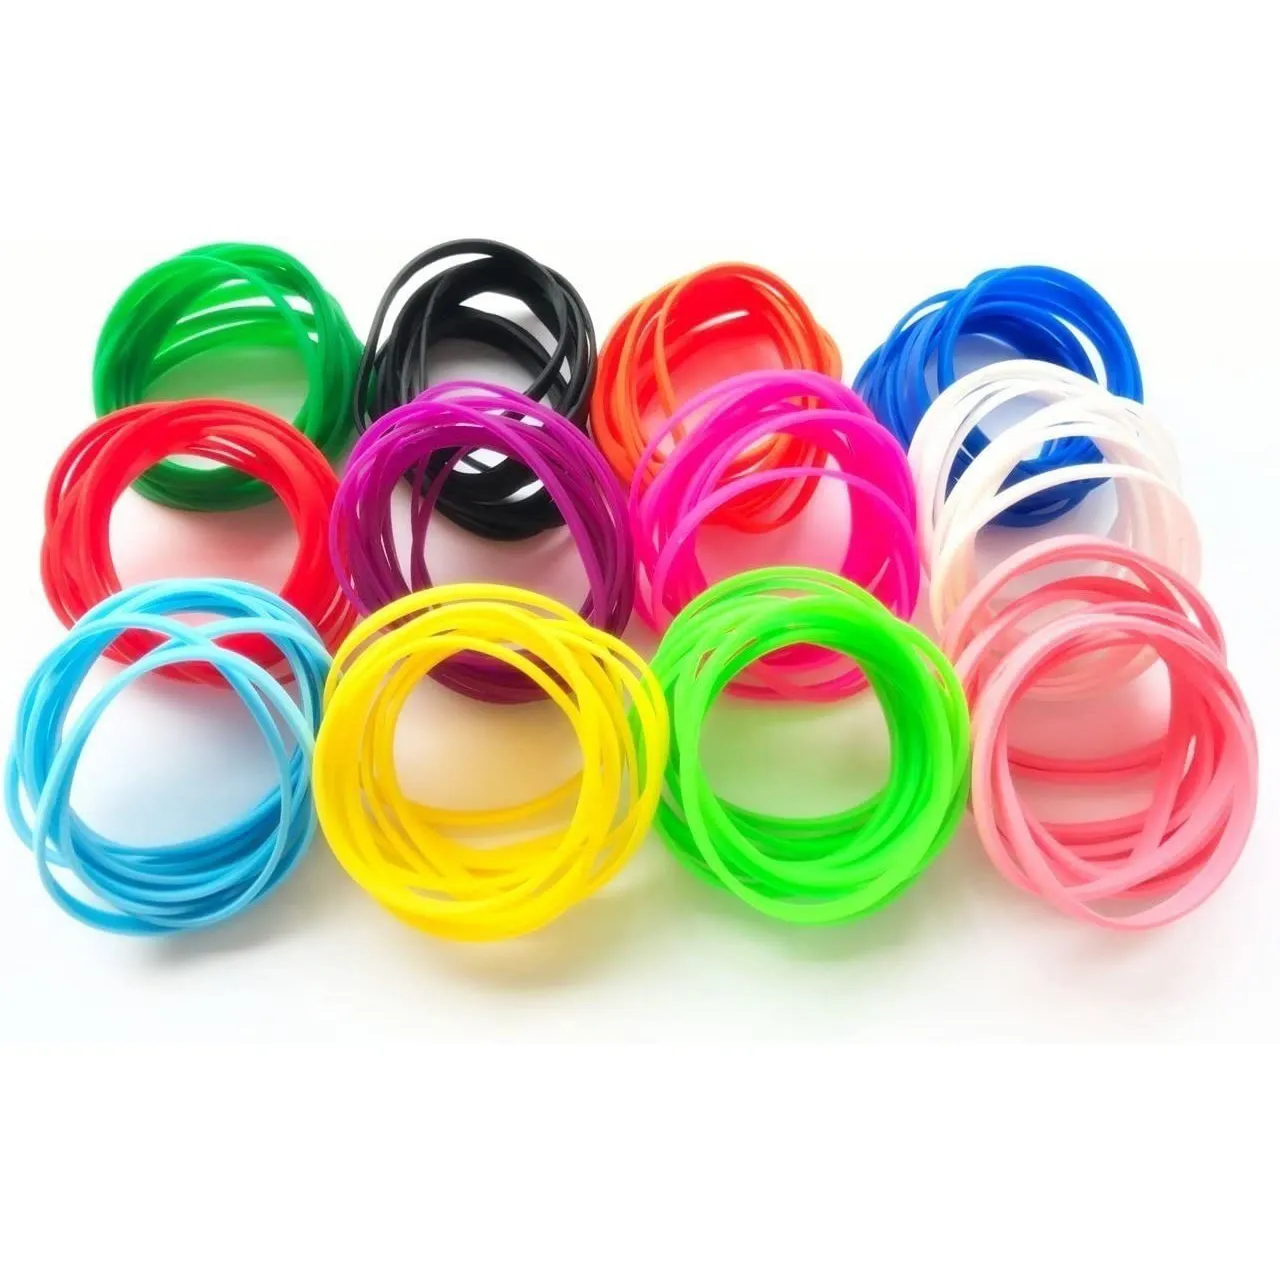 Amazon.com : Hotop Multicolor Silicone Jelly Bracelets Hair Ties for Girls  Women, 100 Pieces (Non Luminescent) : Beauty & Personal Care